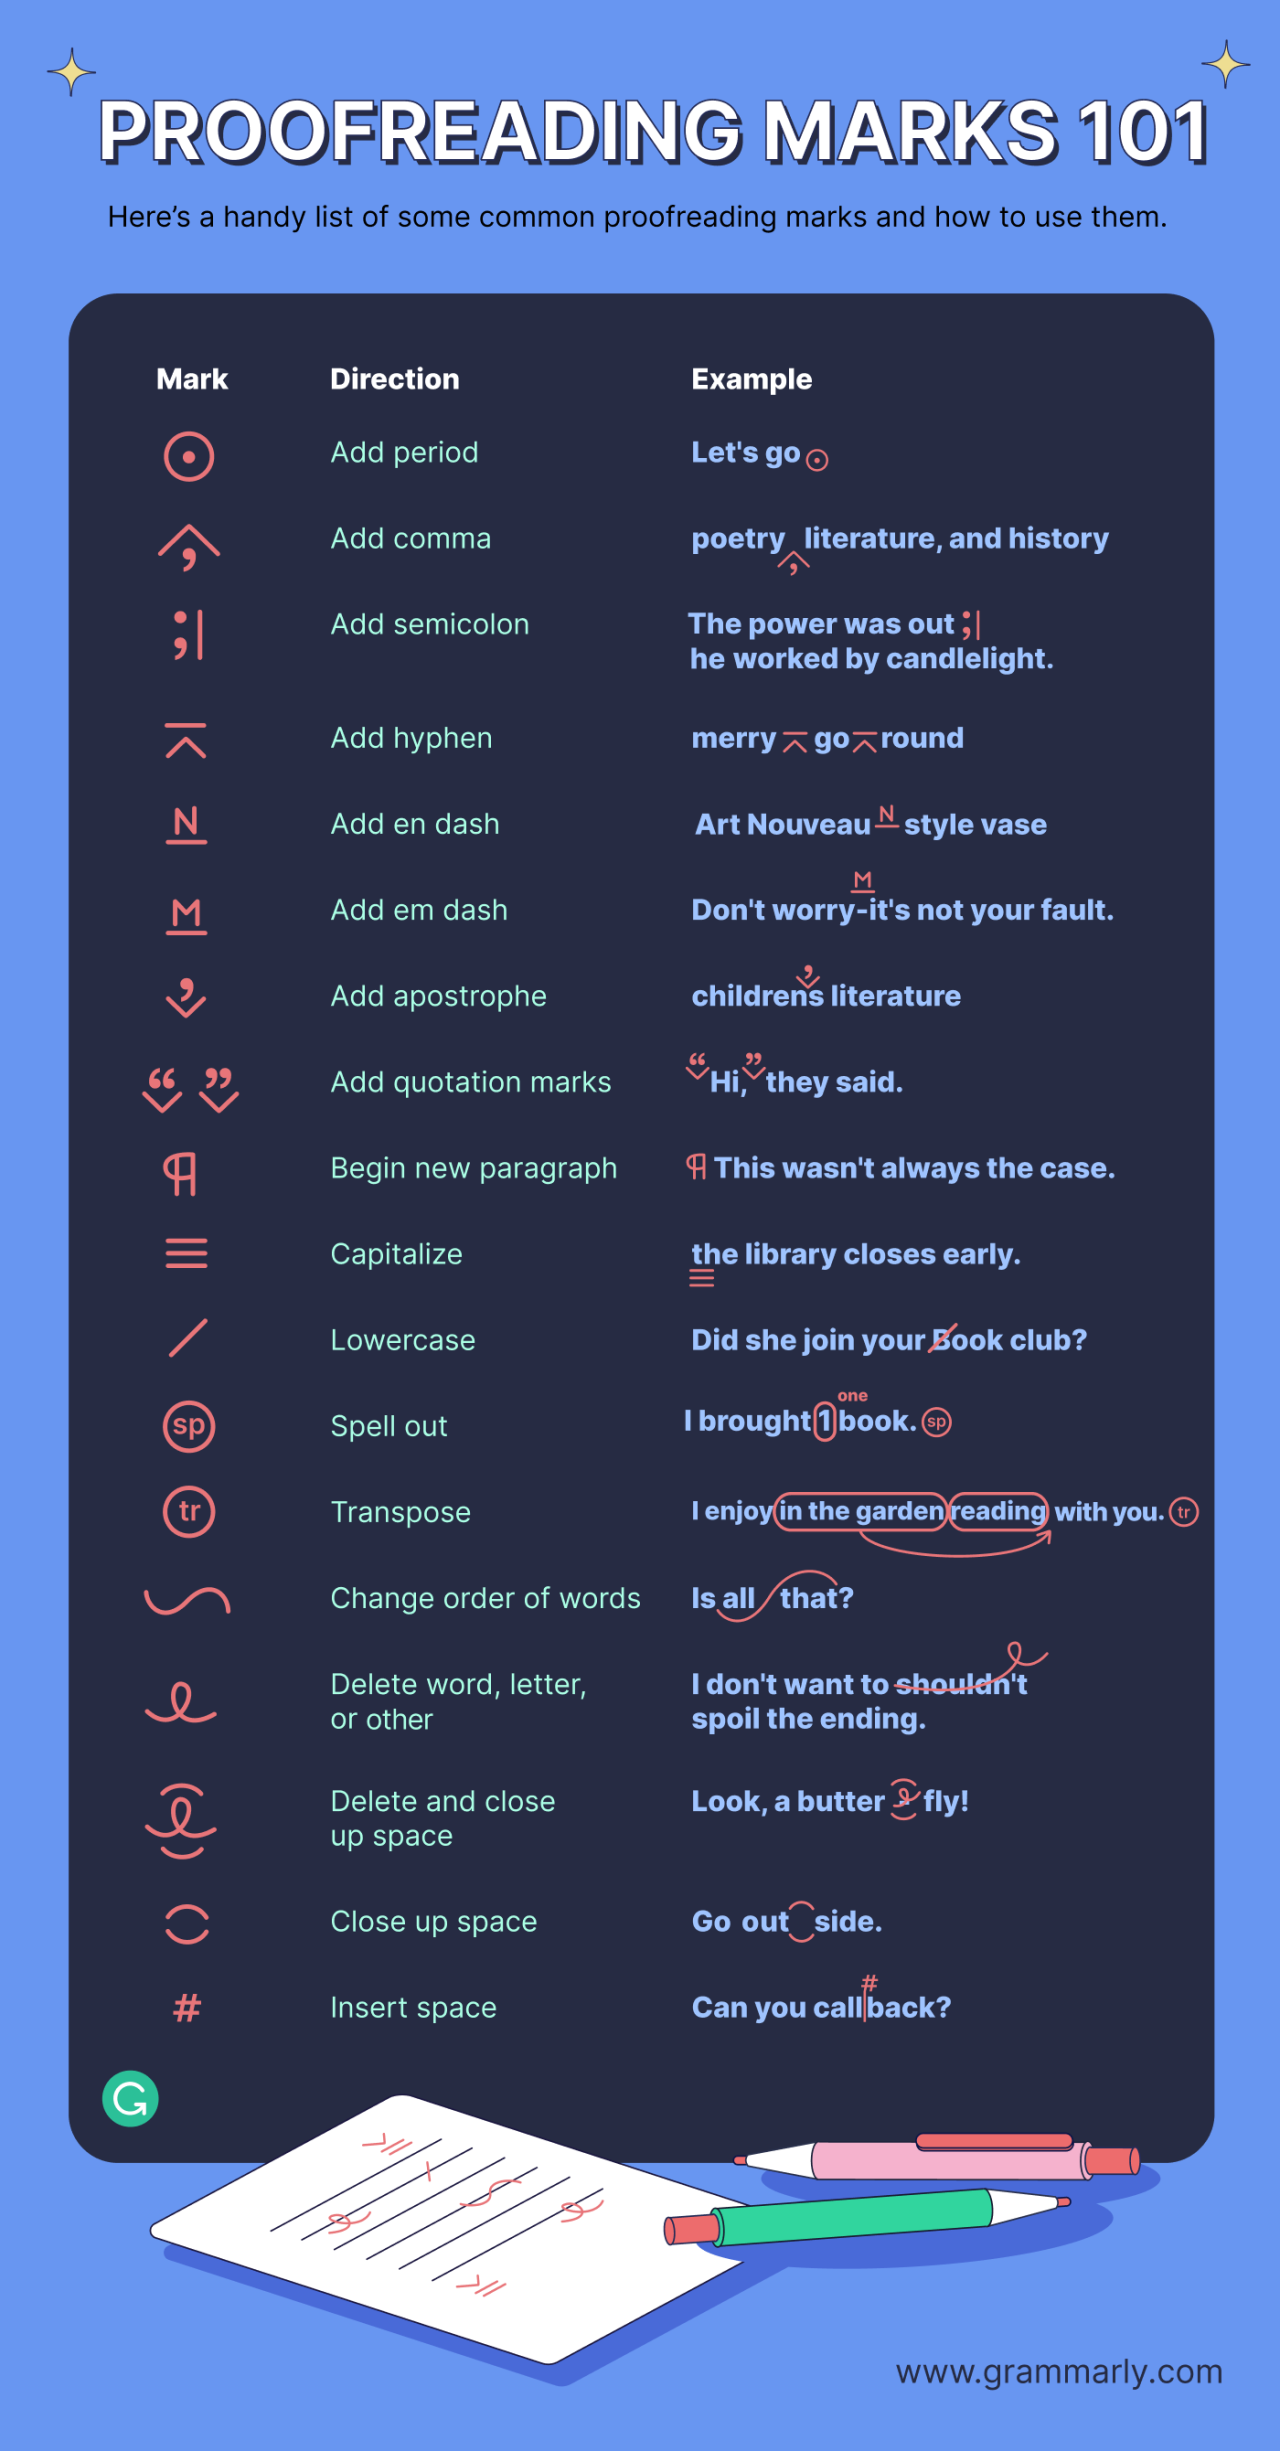 Infographic of symbols representing add period; add comma; add semicolon; add hyphen; add en dash; add em dash; add apostrophe; add quotation marks; begin new paragraph; capitalize; lowercase; spell out; transpose; and change order of words.